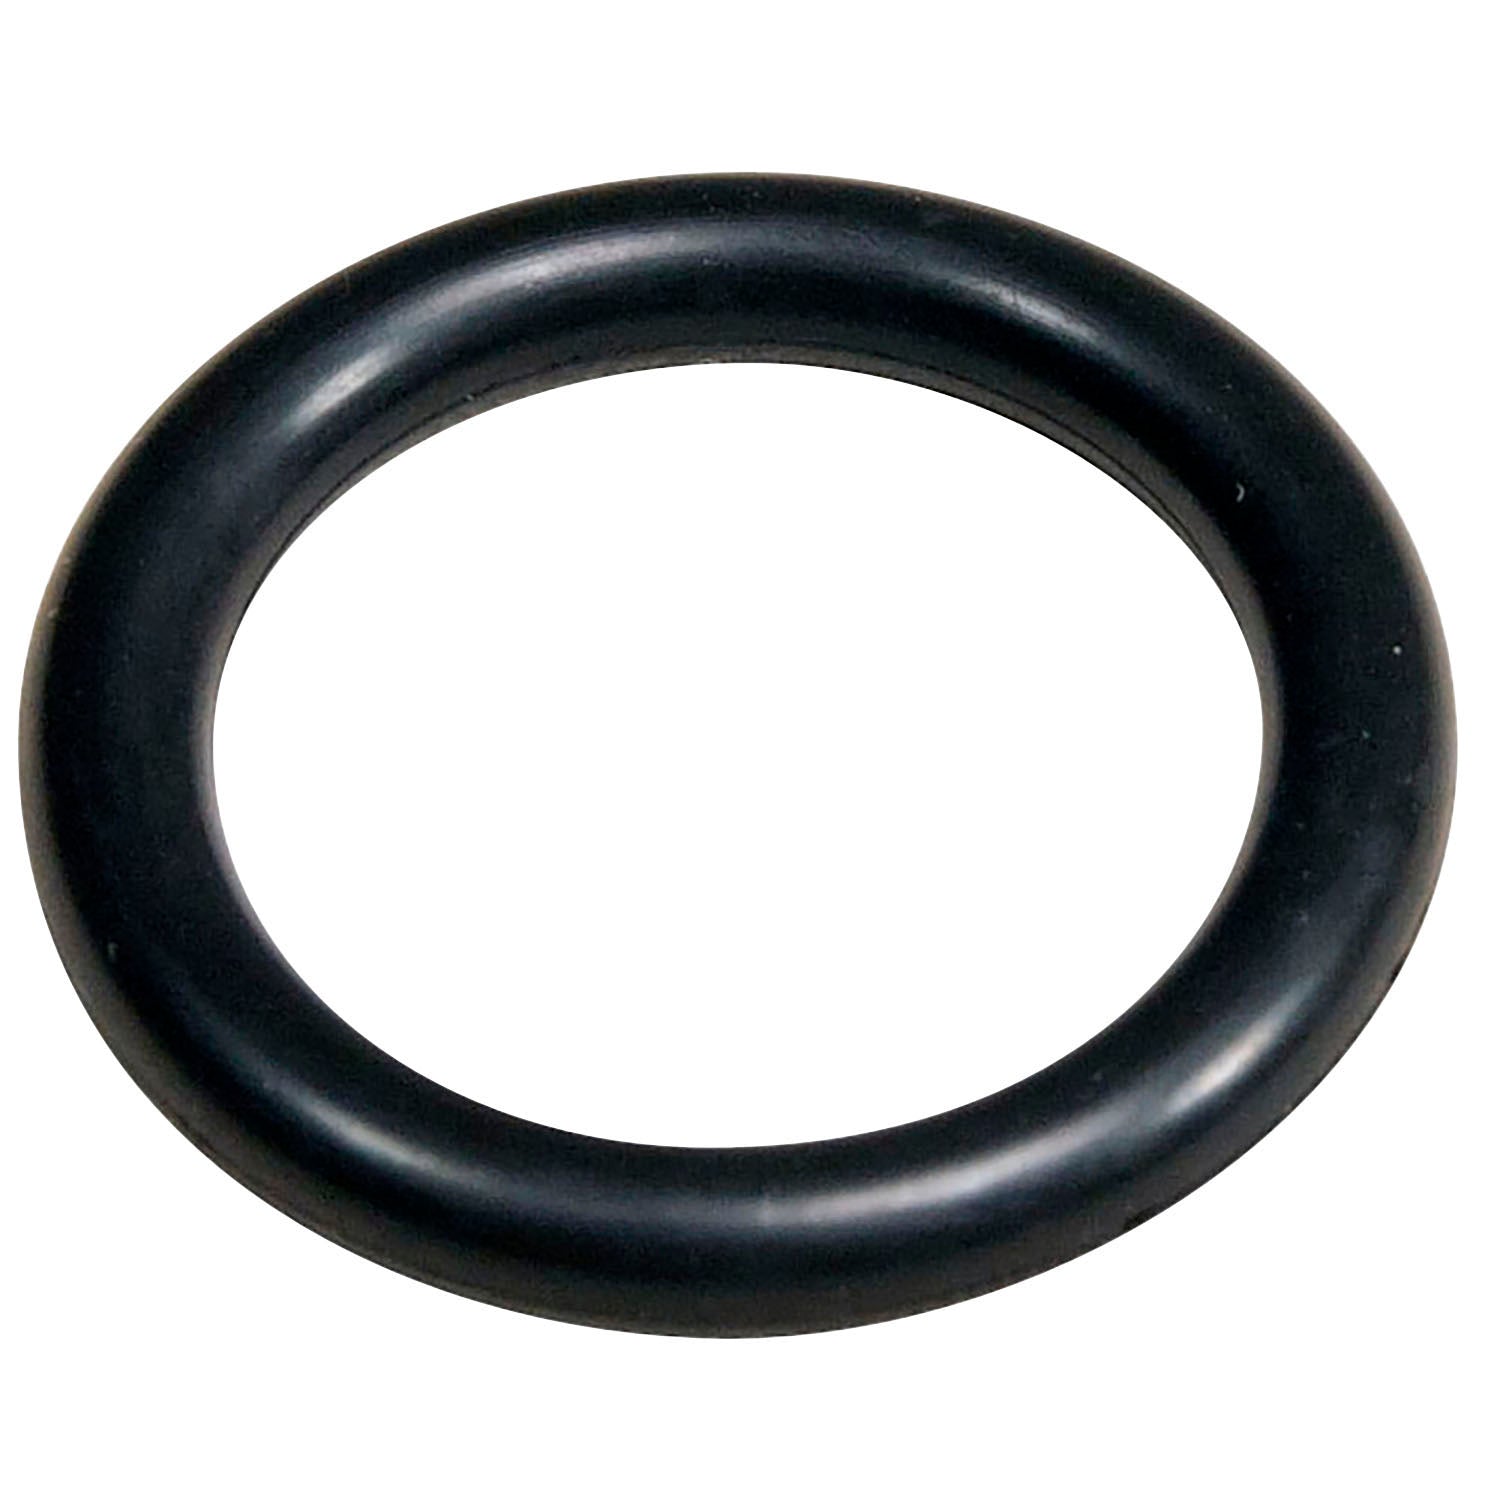 Welch 304801 REPLACEMENT VITON O-RING NW 16